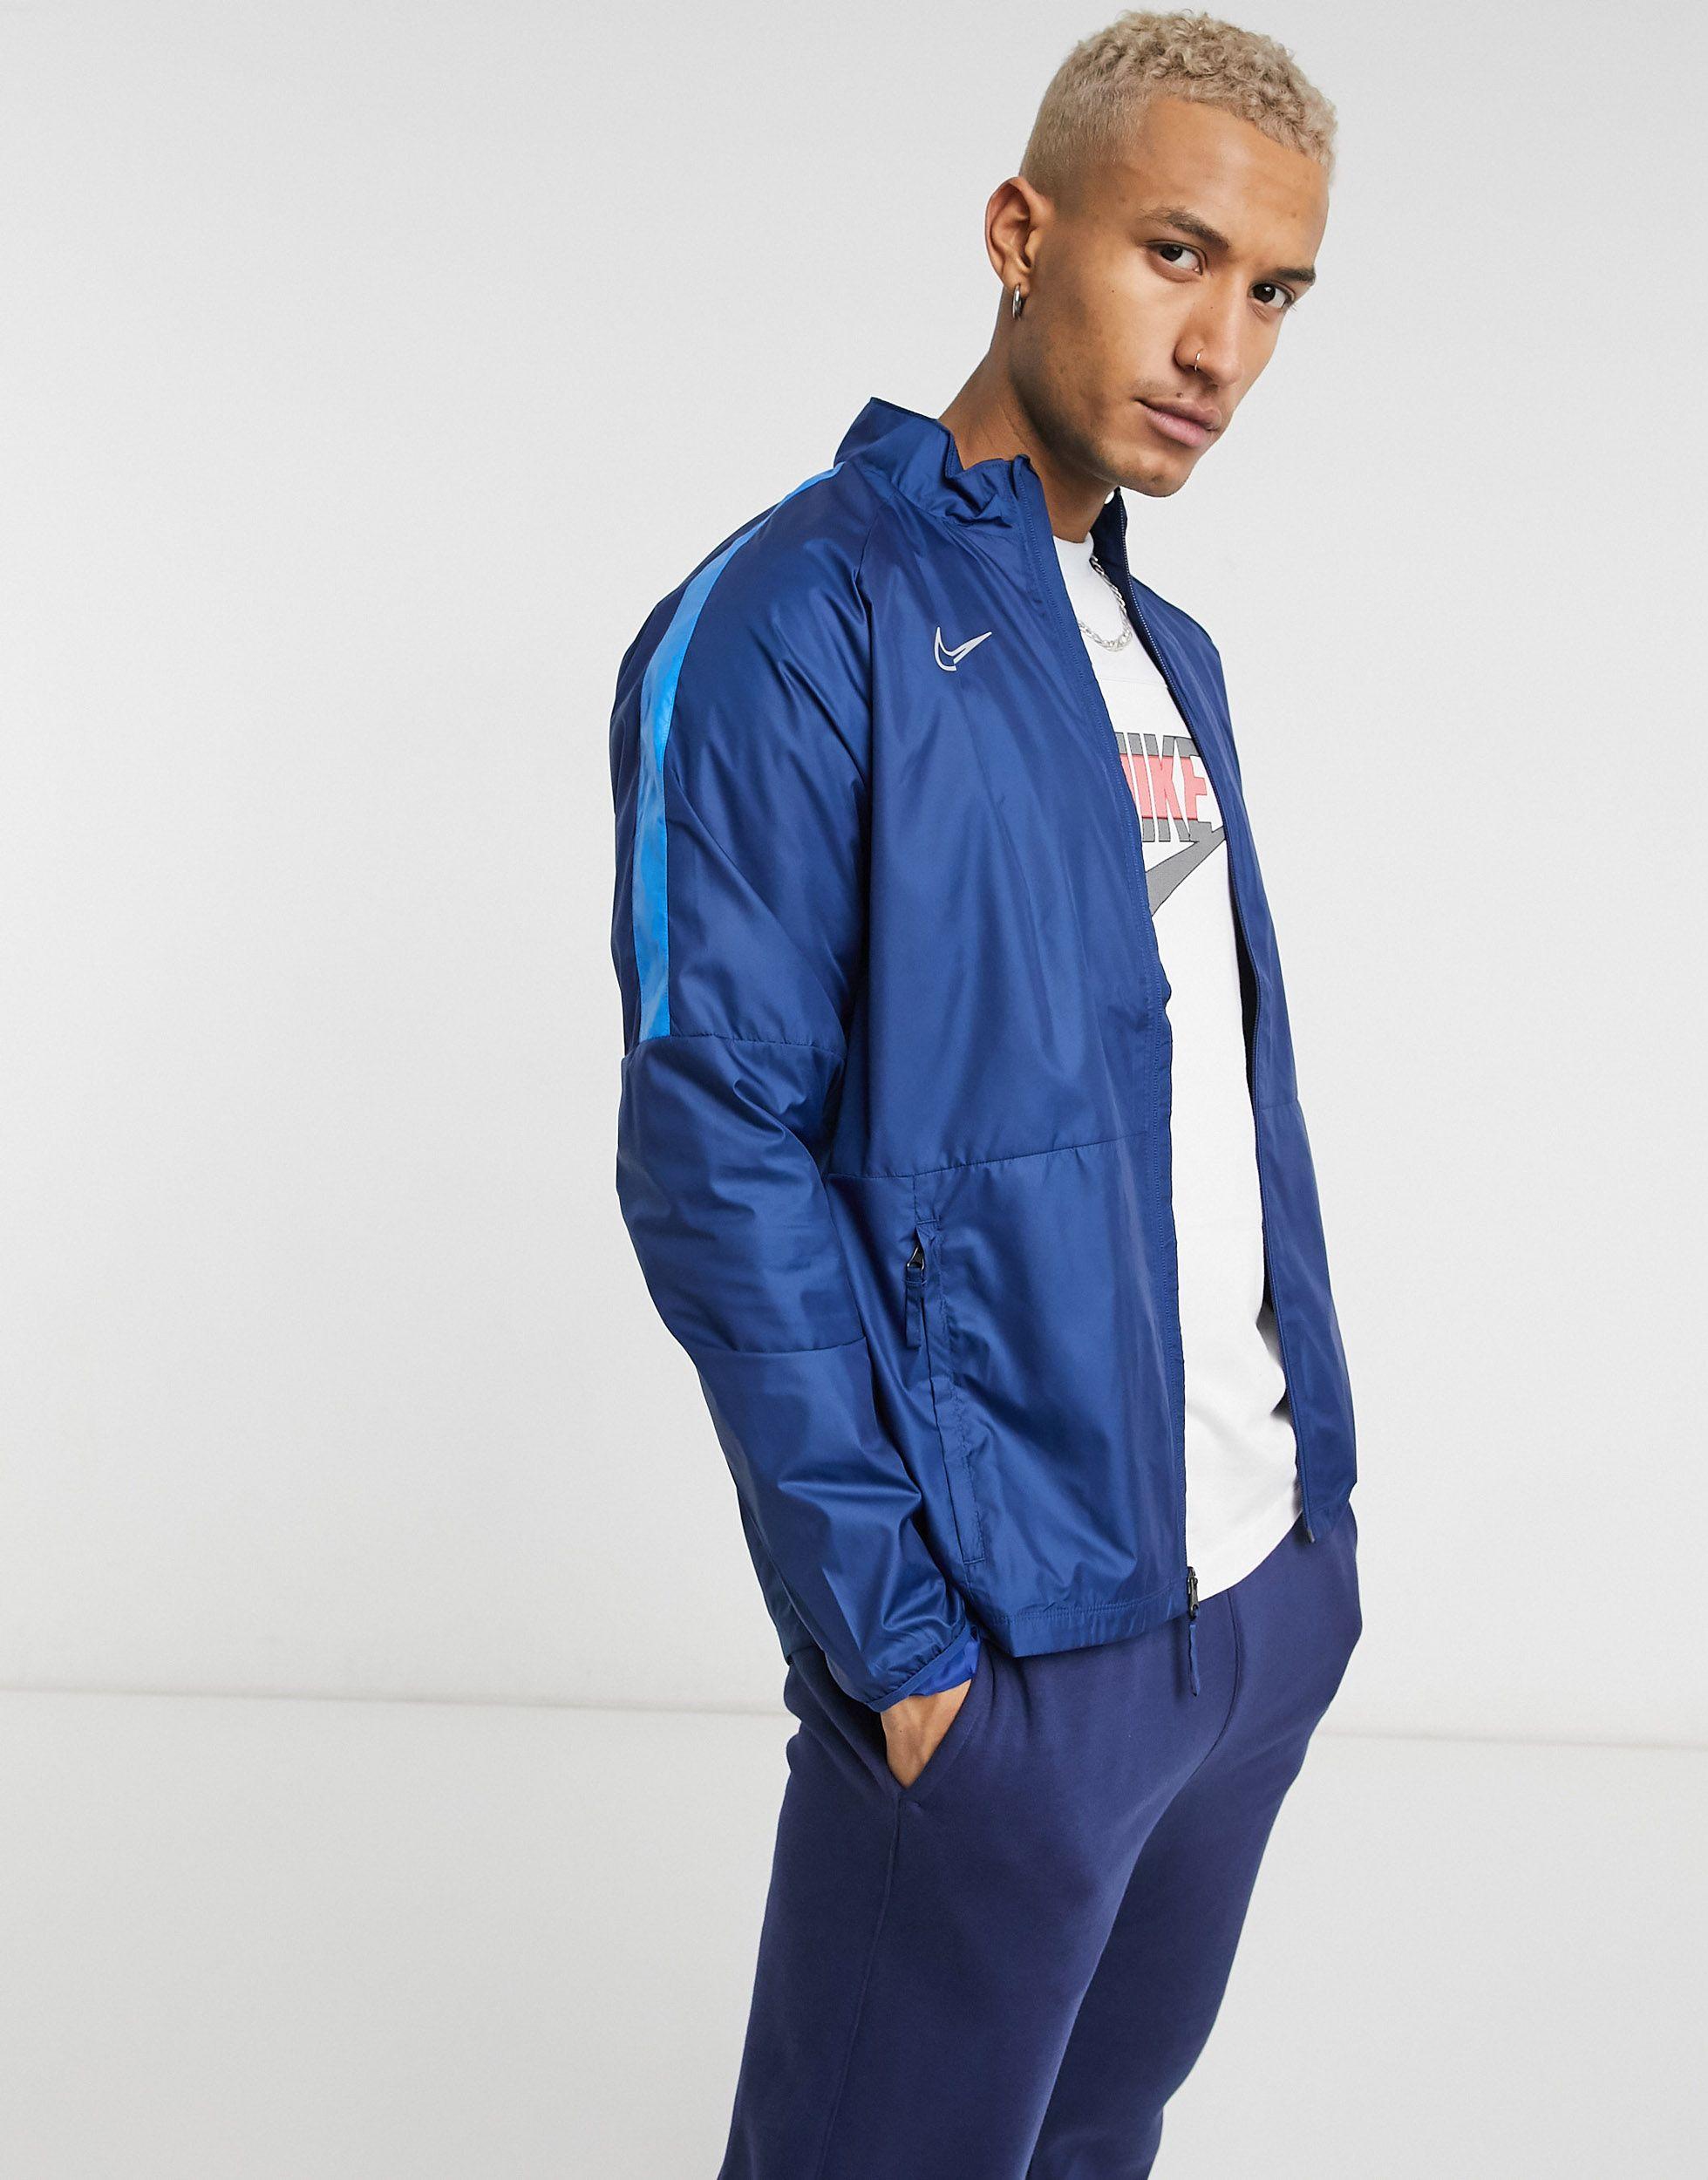 Nike Academy Track Jacket in Blue for Men - Save 22% - Lyst